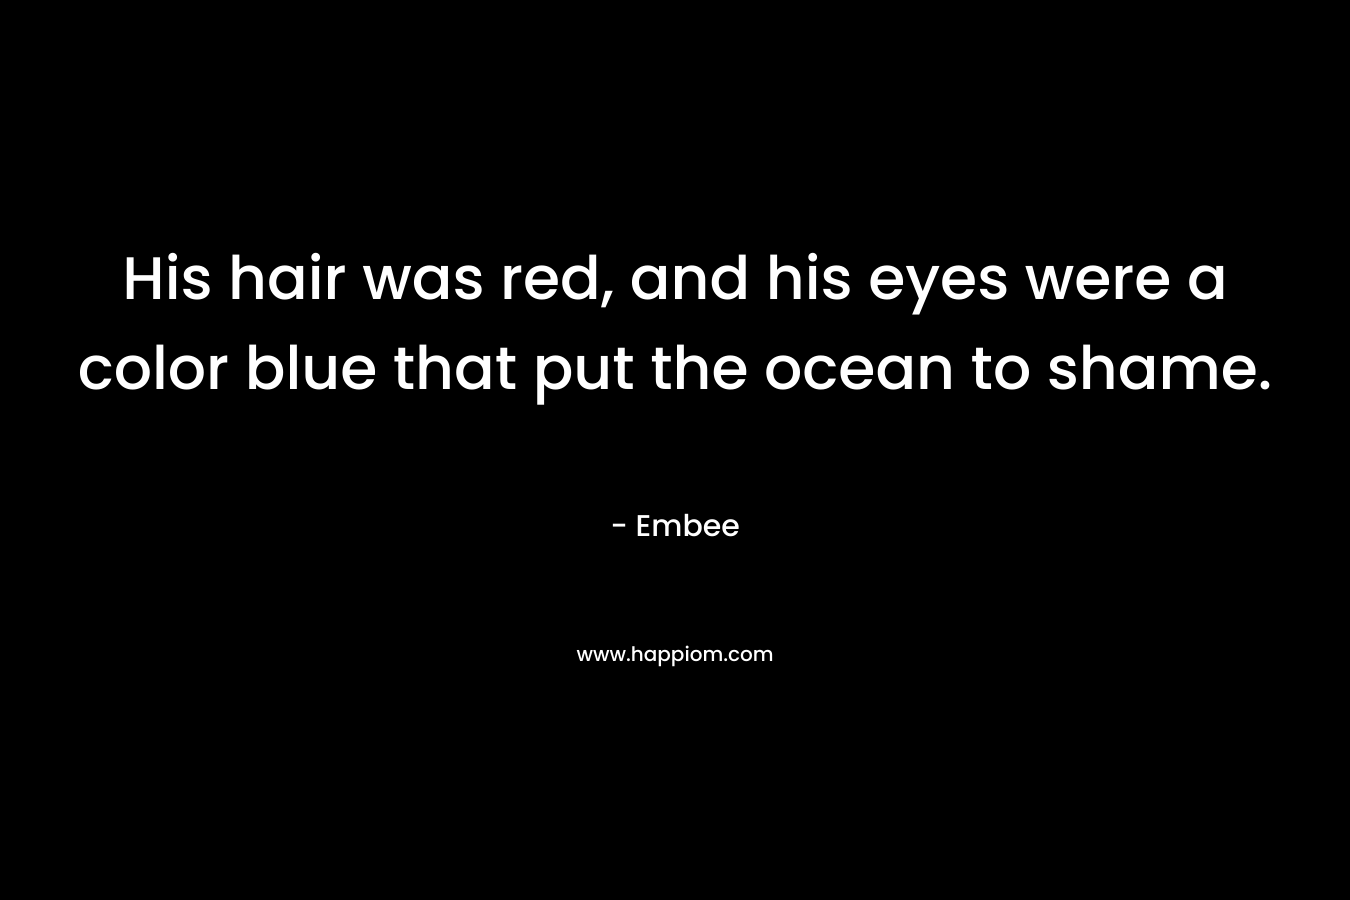 His hair was red, and his eyes were a color blue that put the ocean to shame.